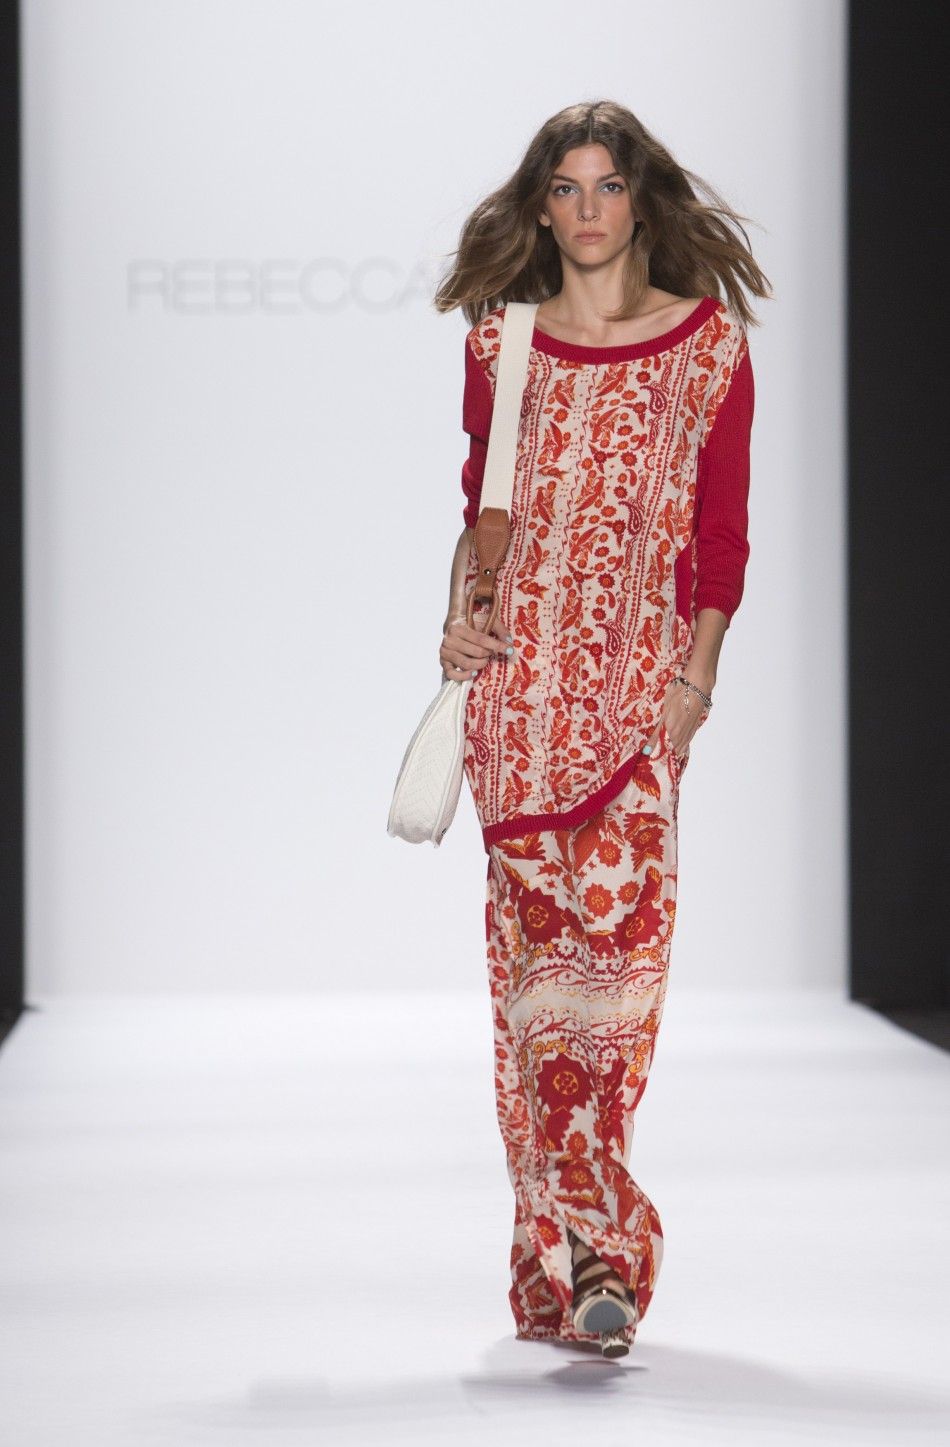 Rebecca Minkoff unveiled her pool party-themed Spring 2013 collection inspired by photographer Slim Aarons at Mercedes-Benz Fashion Week in New York on Friday with Lauren Conrad,  AnnaSophia Robb and Olympic swimmer Ryan Lochte seated front row. The colle